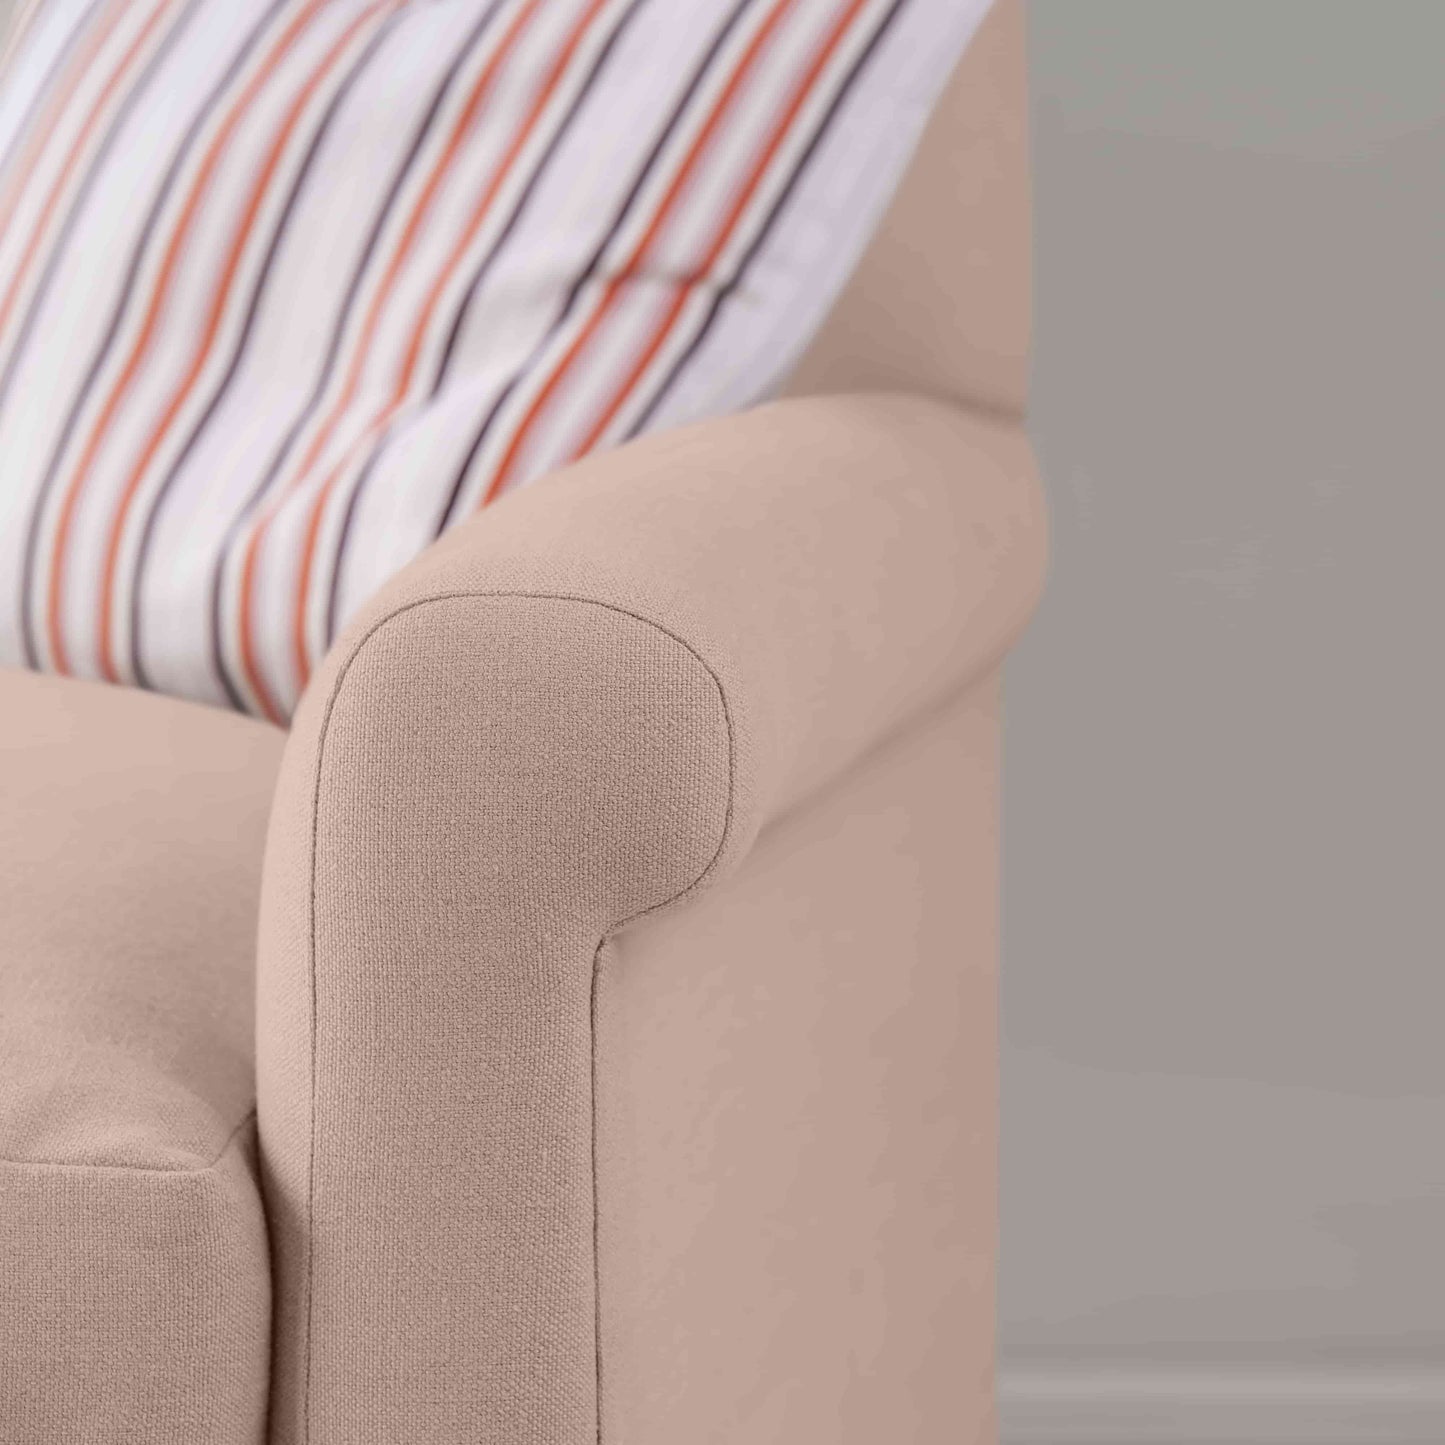 Idler Armchair in Laidback Linen Dusky Pink